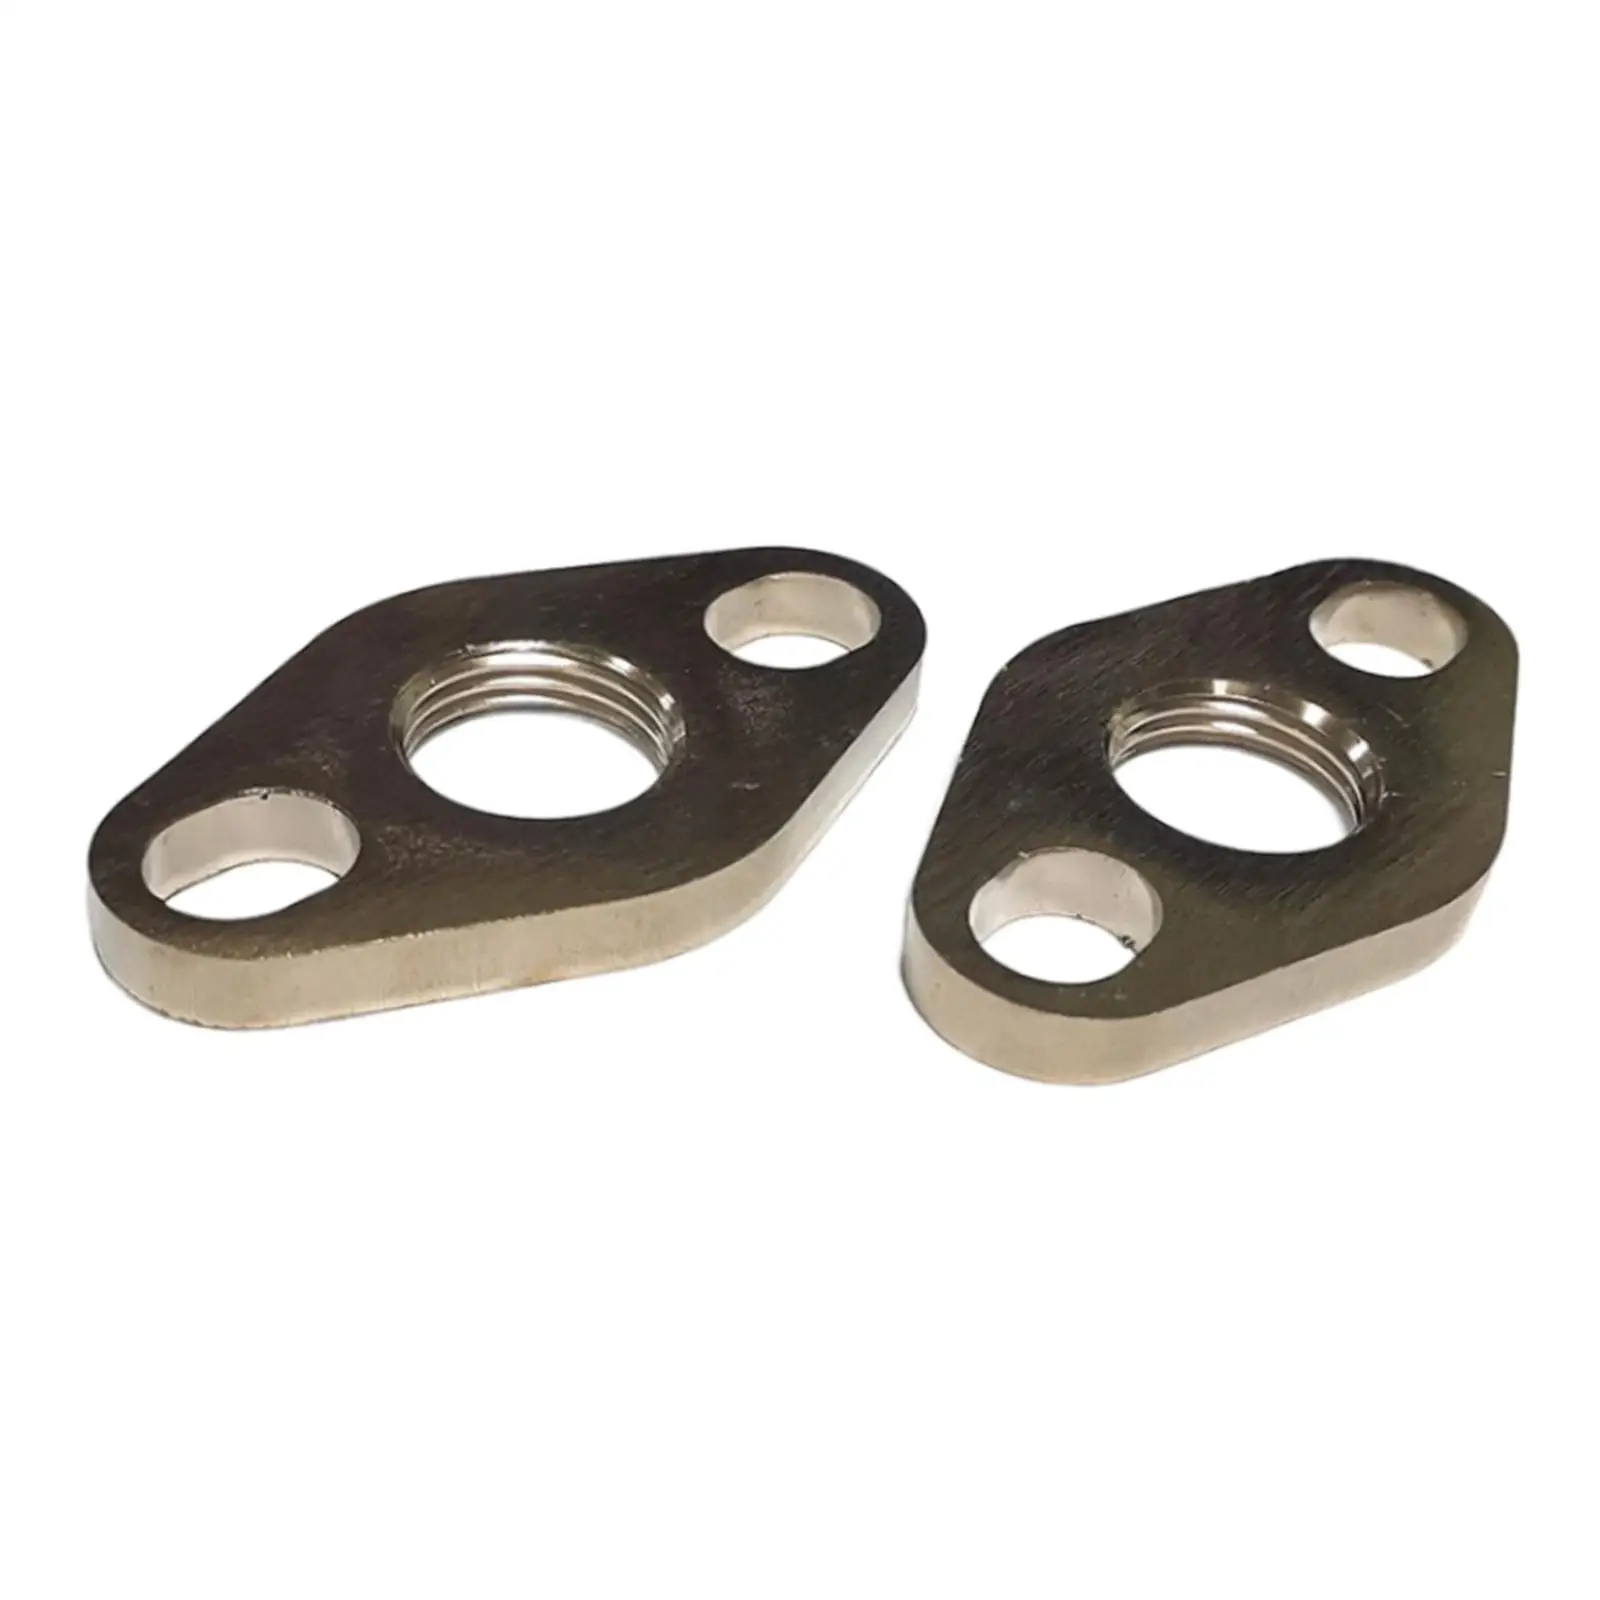 Flange Gasket Premium Universal Spare Parts Replaces for Toyota for tacoma